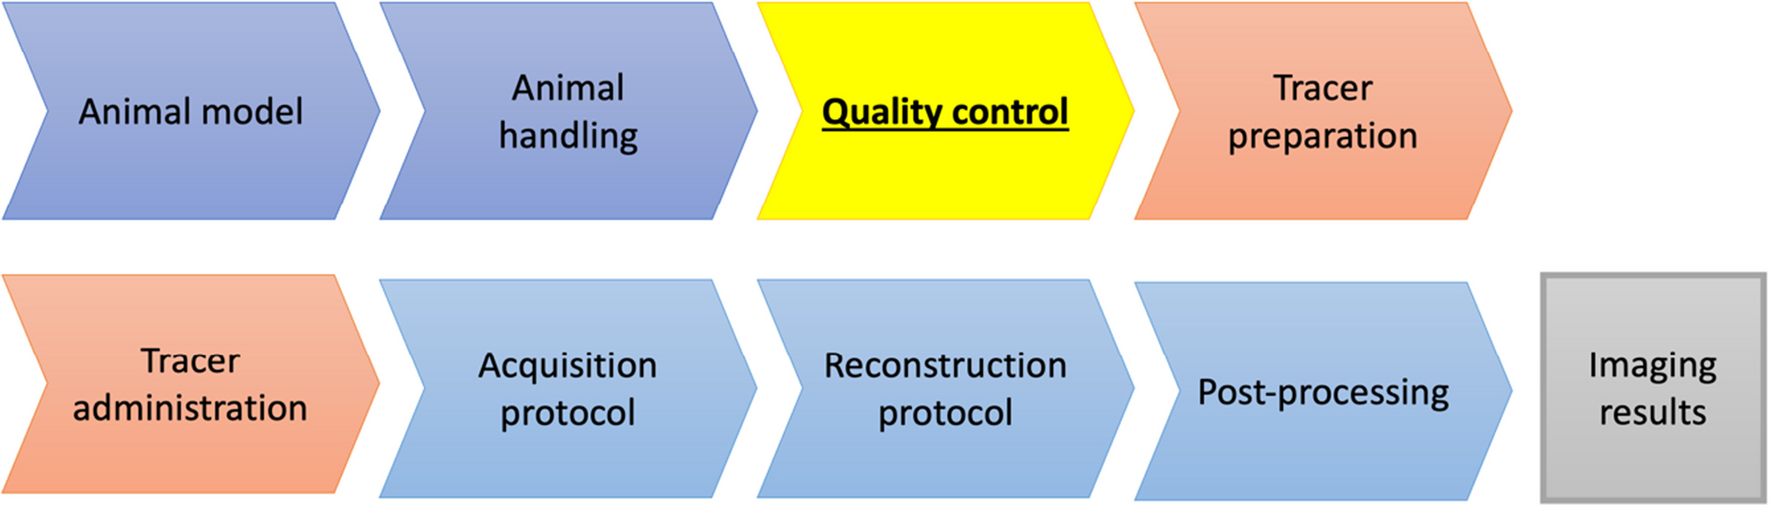 Preclinical SPECT and PET: Joint EANM and ESMI procedure guideline for implementing an efficient quality control programme